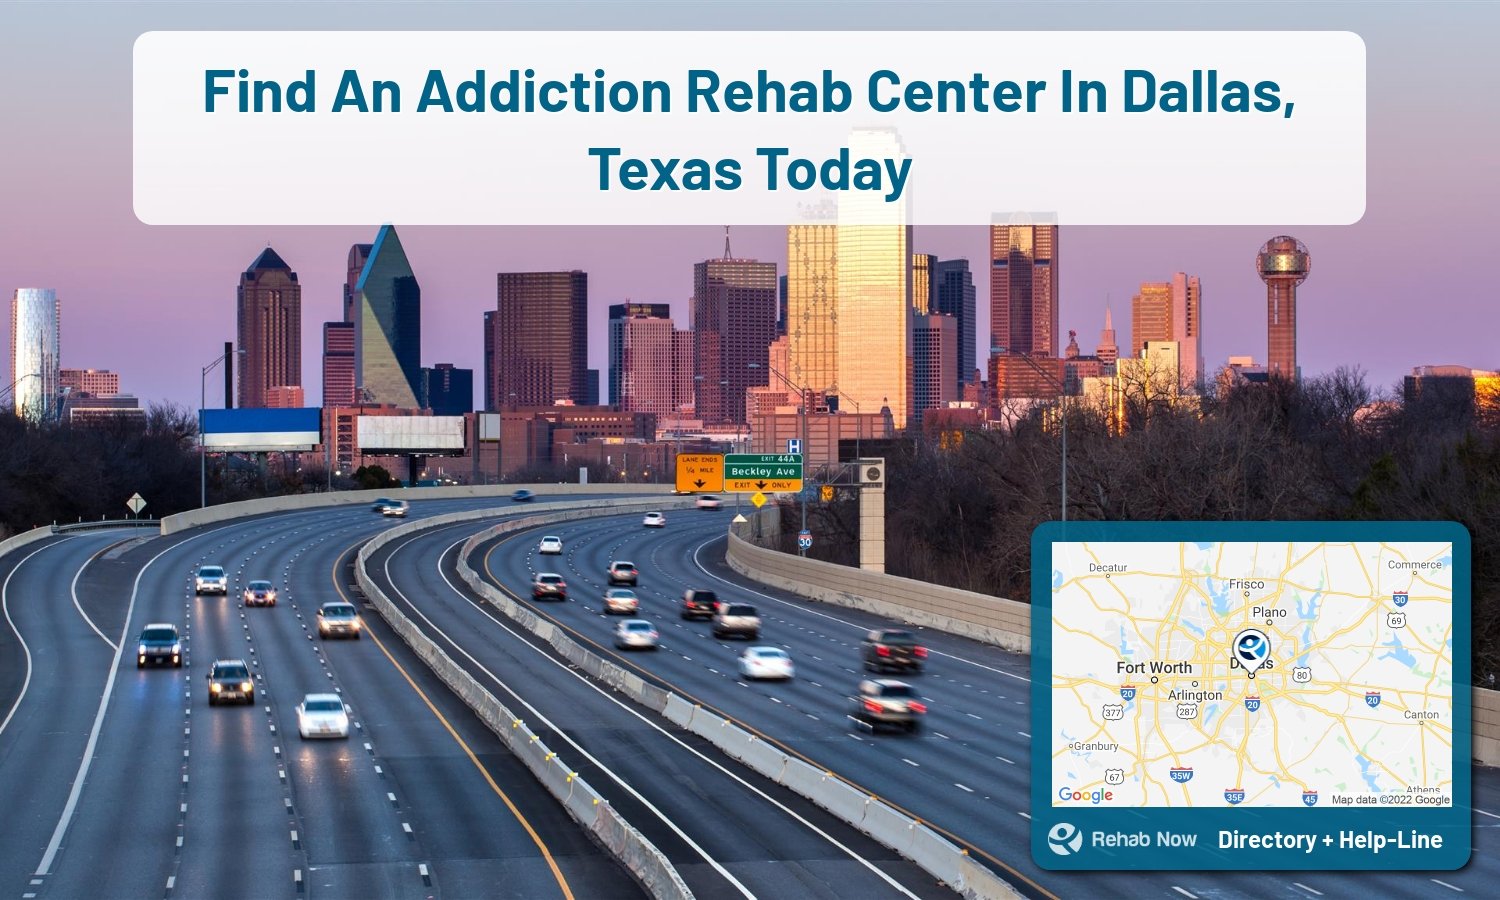 Dallas, TX Treatment Centers. Find drug rehab in Dallas, Texas, or detox and treatment programs. Get the right help now!